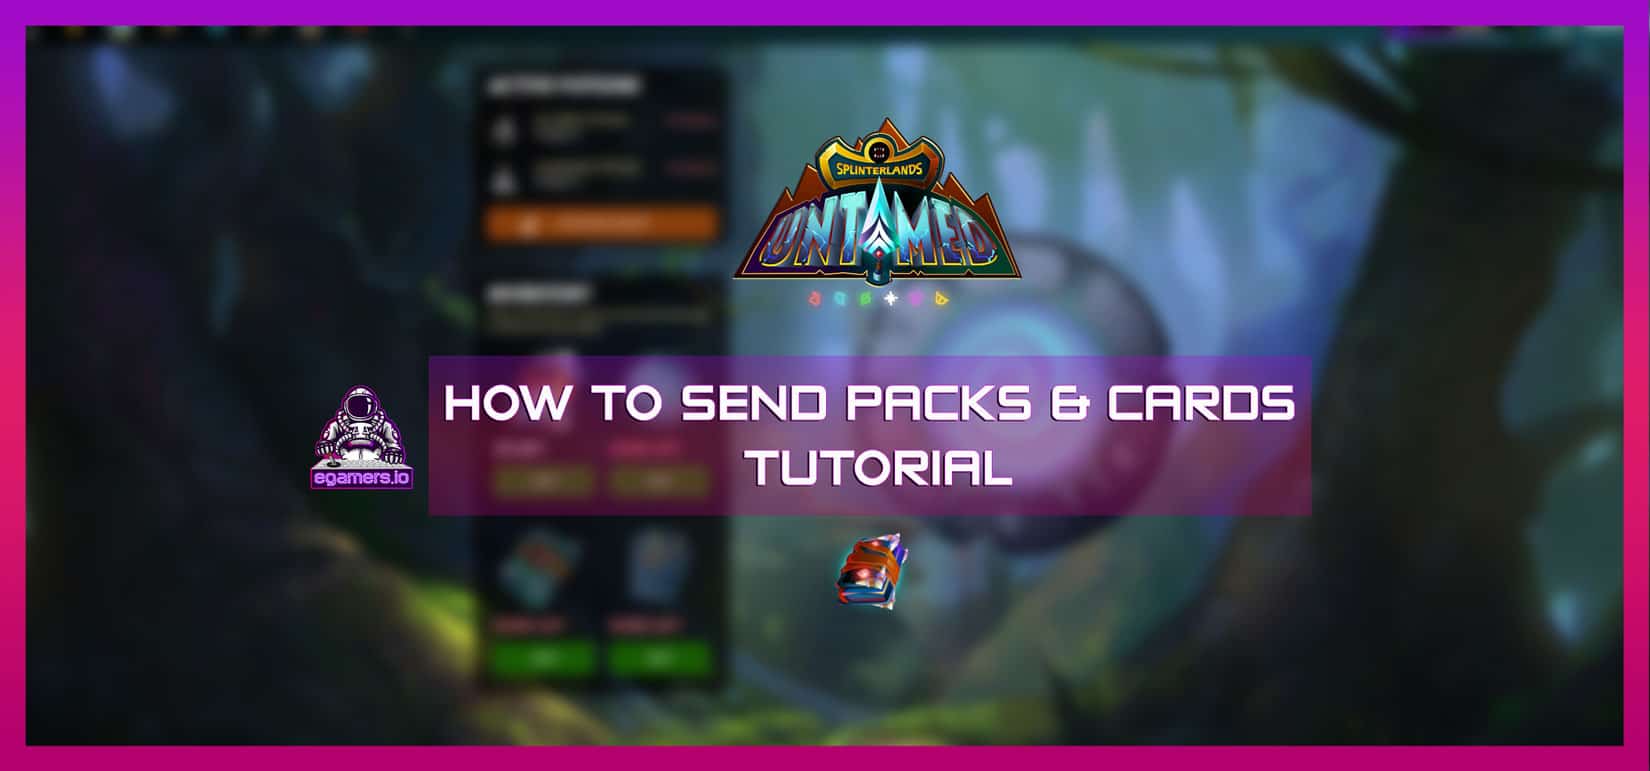 how to send splinterlands packs and cards to other users blockchain game Bountyblok has replaced its centralized randomizer service, and integrated Chainlink VRF and Price Feeds on the Polygon Mainnet for their distribution tools and giveaways. 